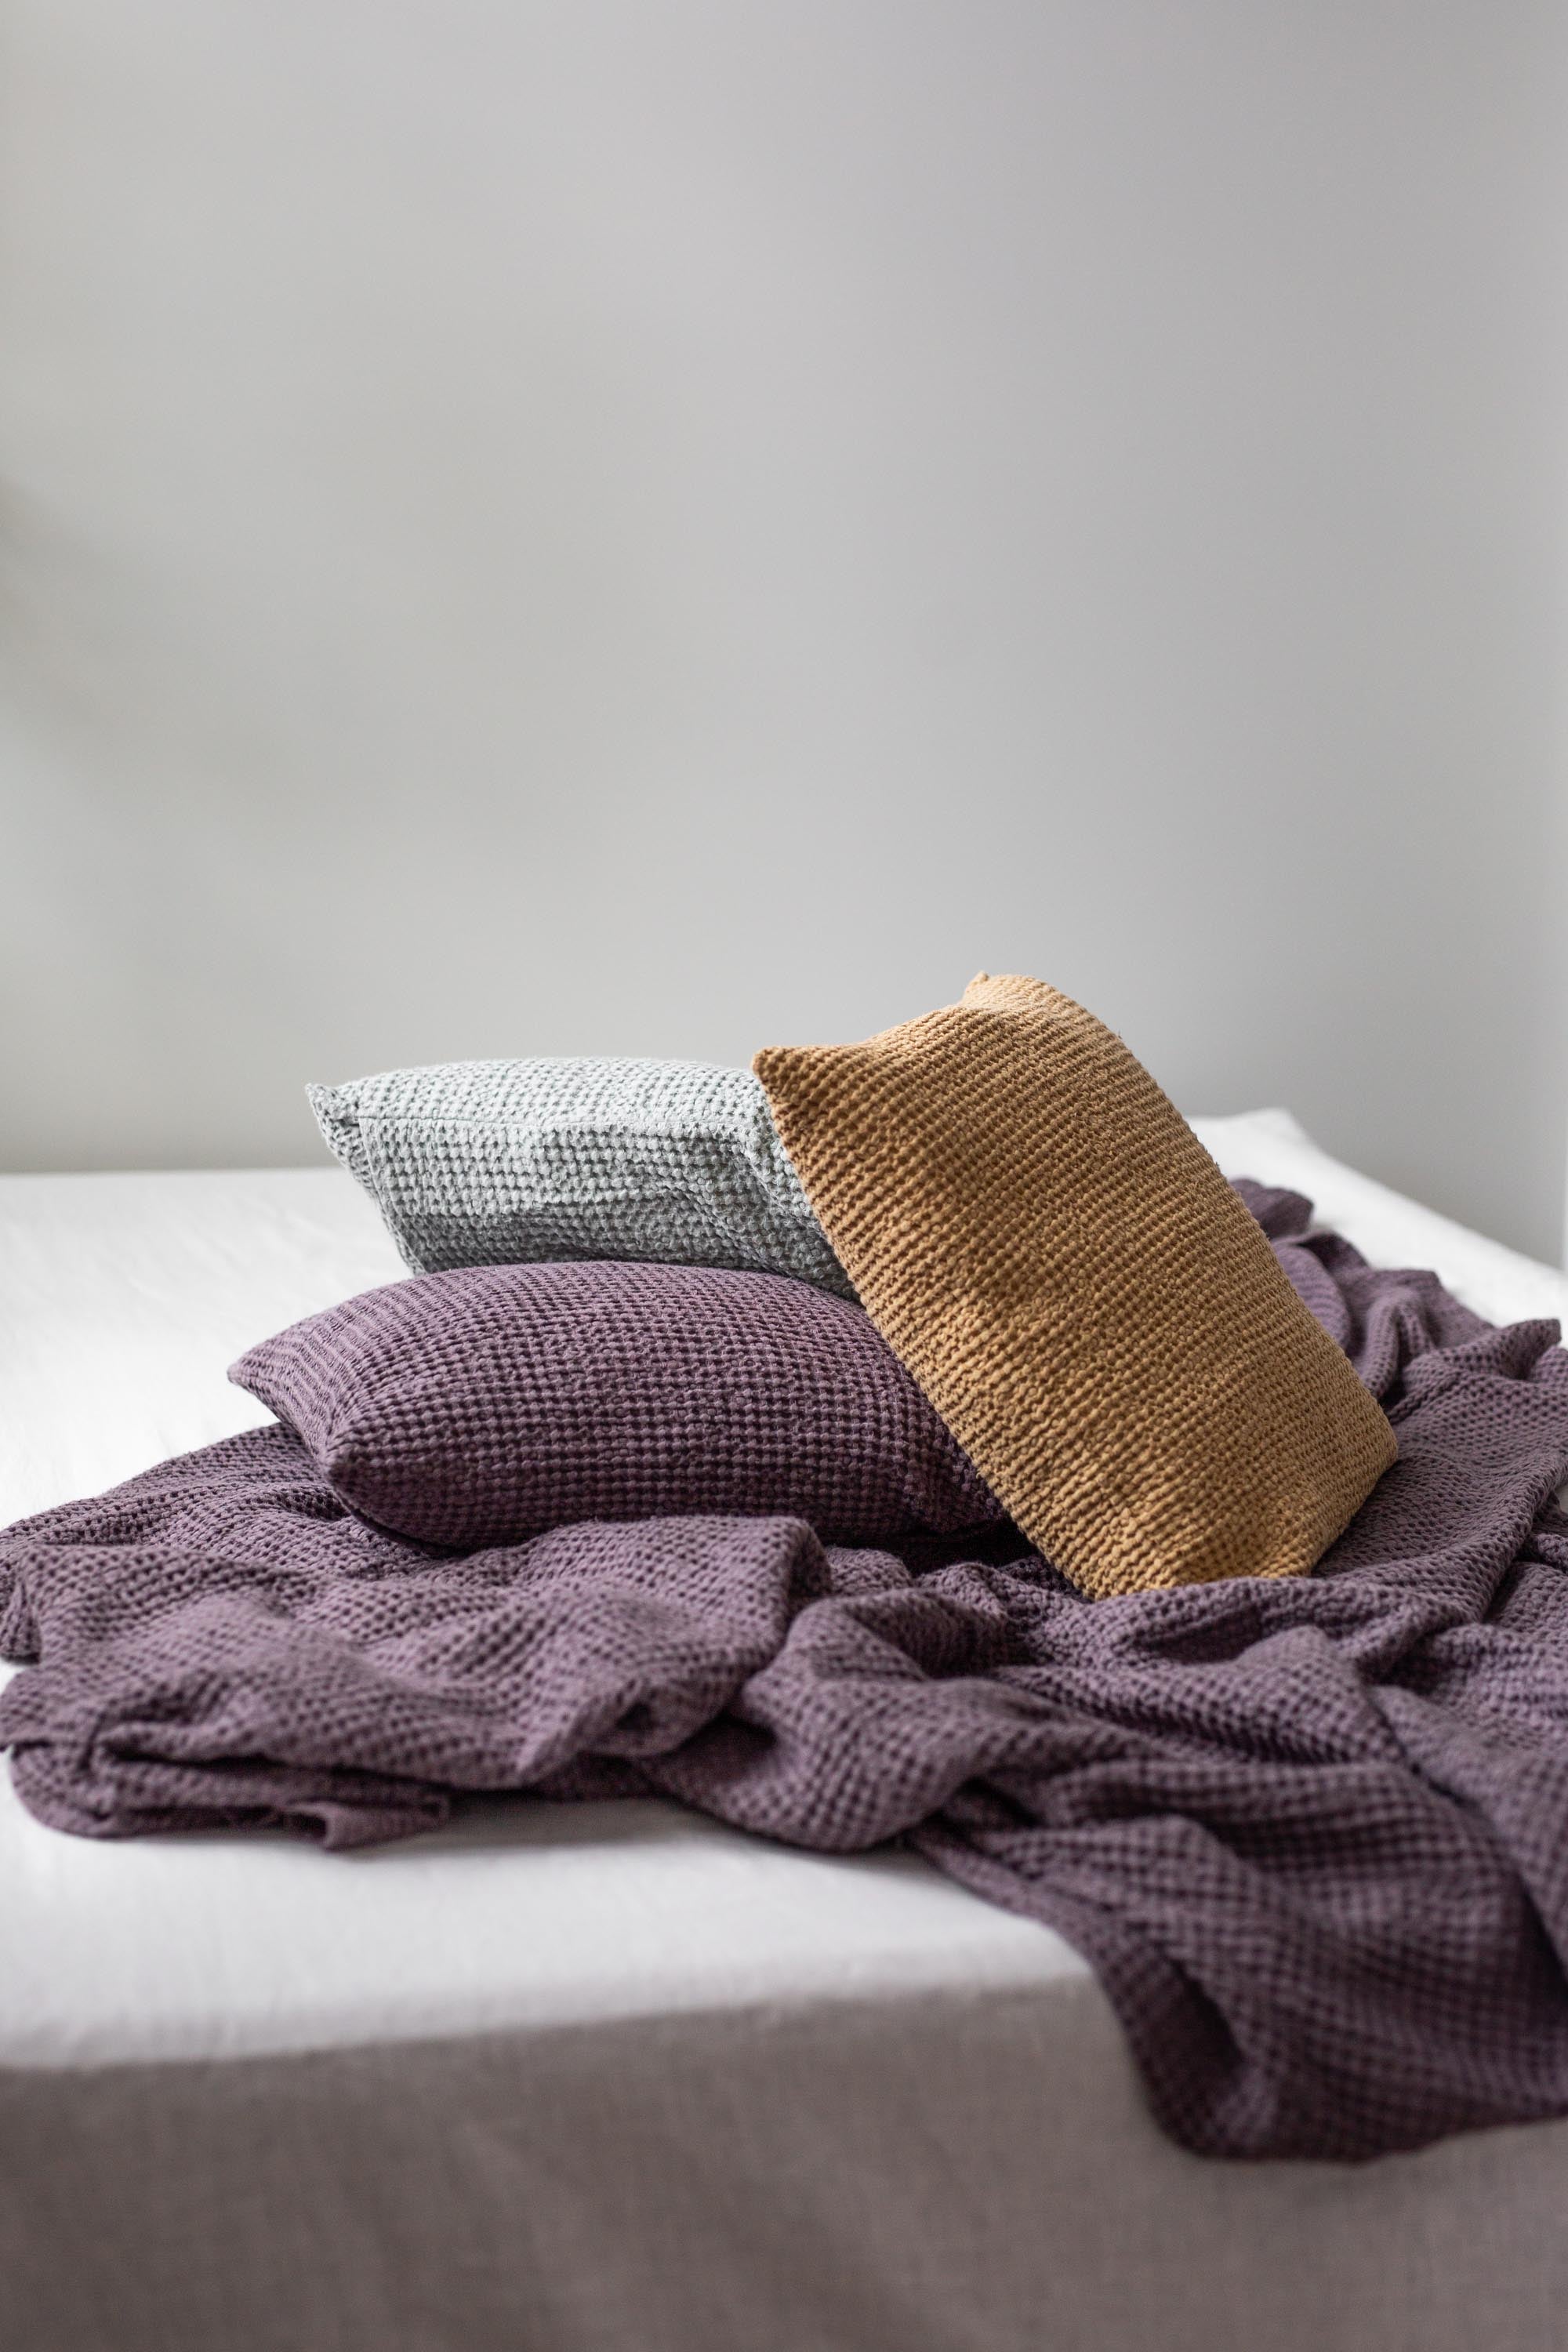 Linen Waffle Bed Throw in Dusty Lavender By AmourLinen